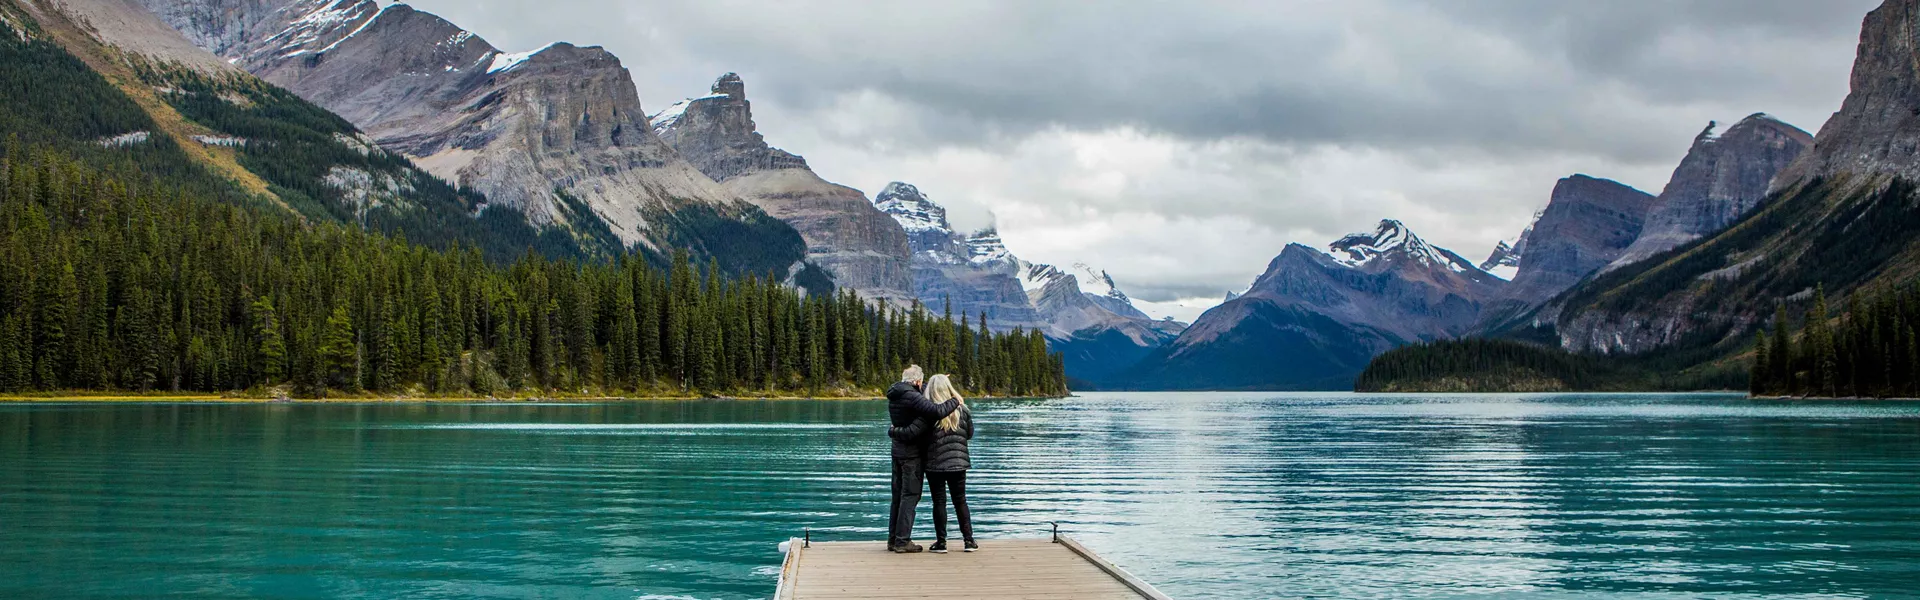 XA couple of people standing on a pier next to Maligne Lake in Canada